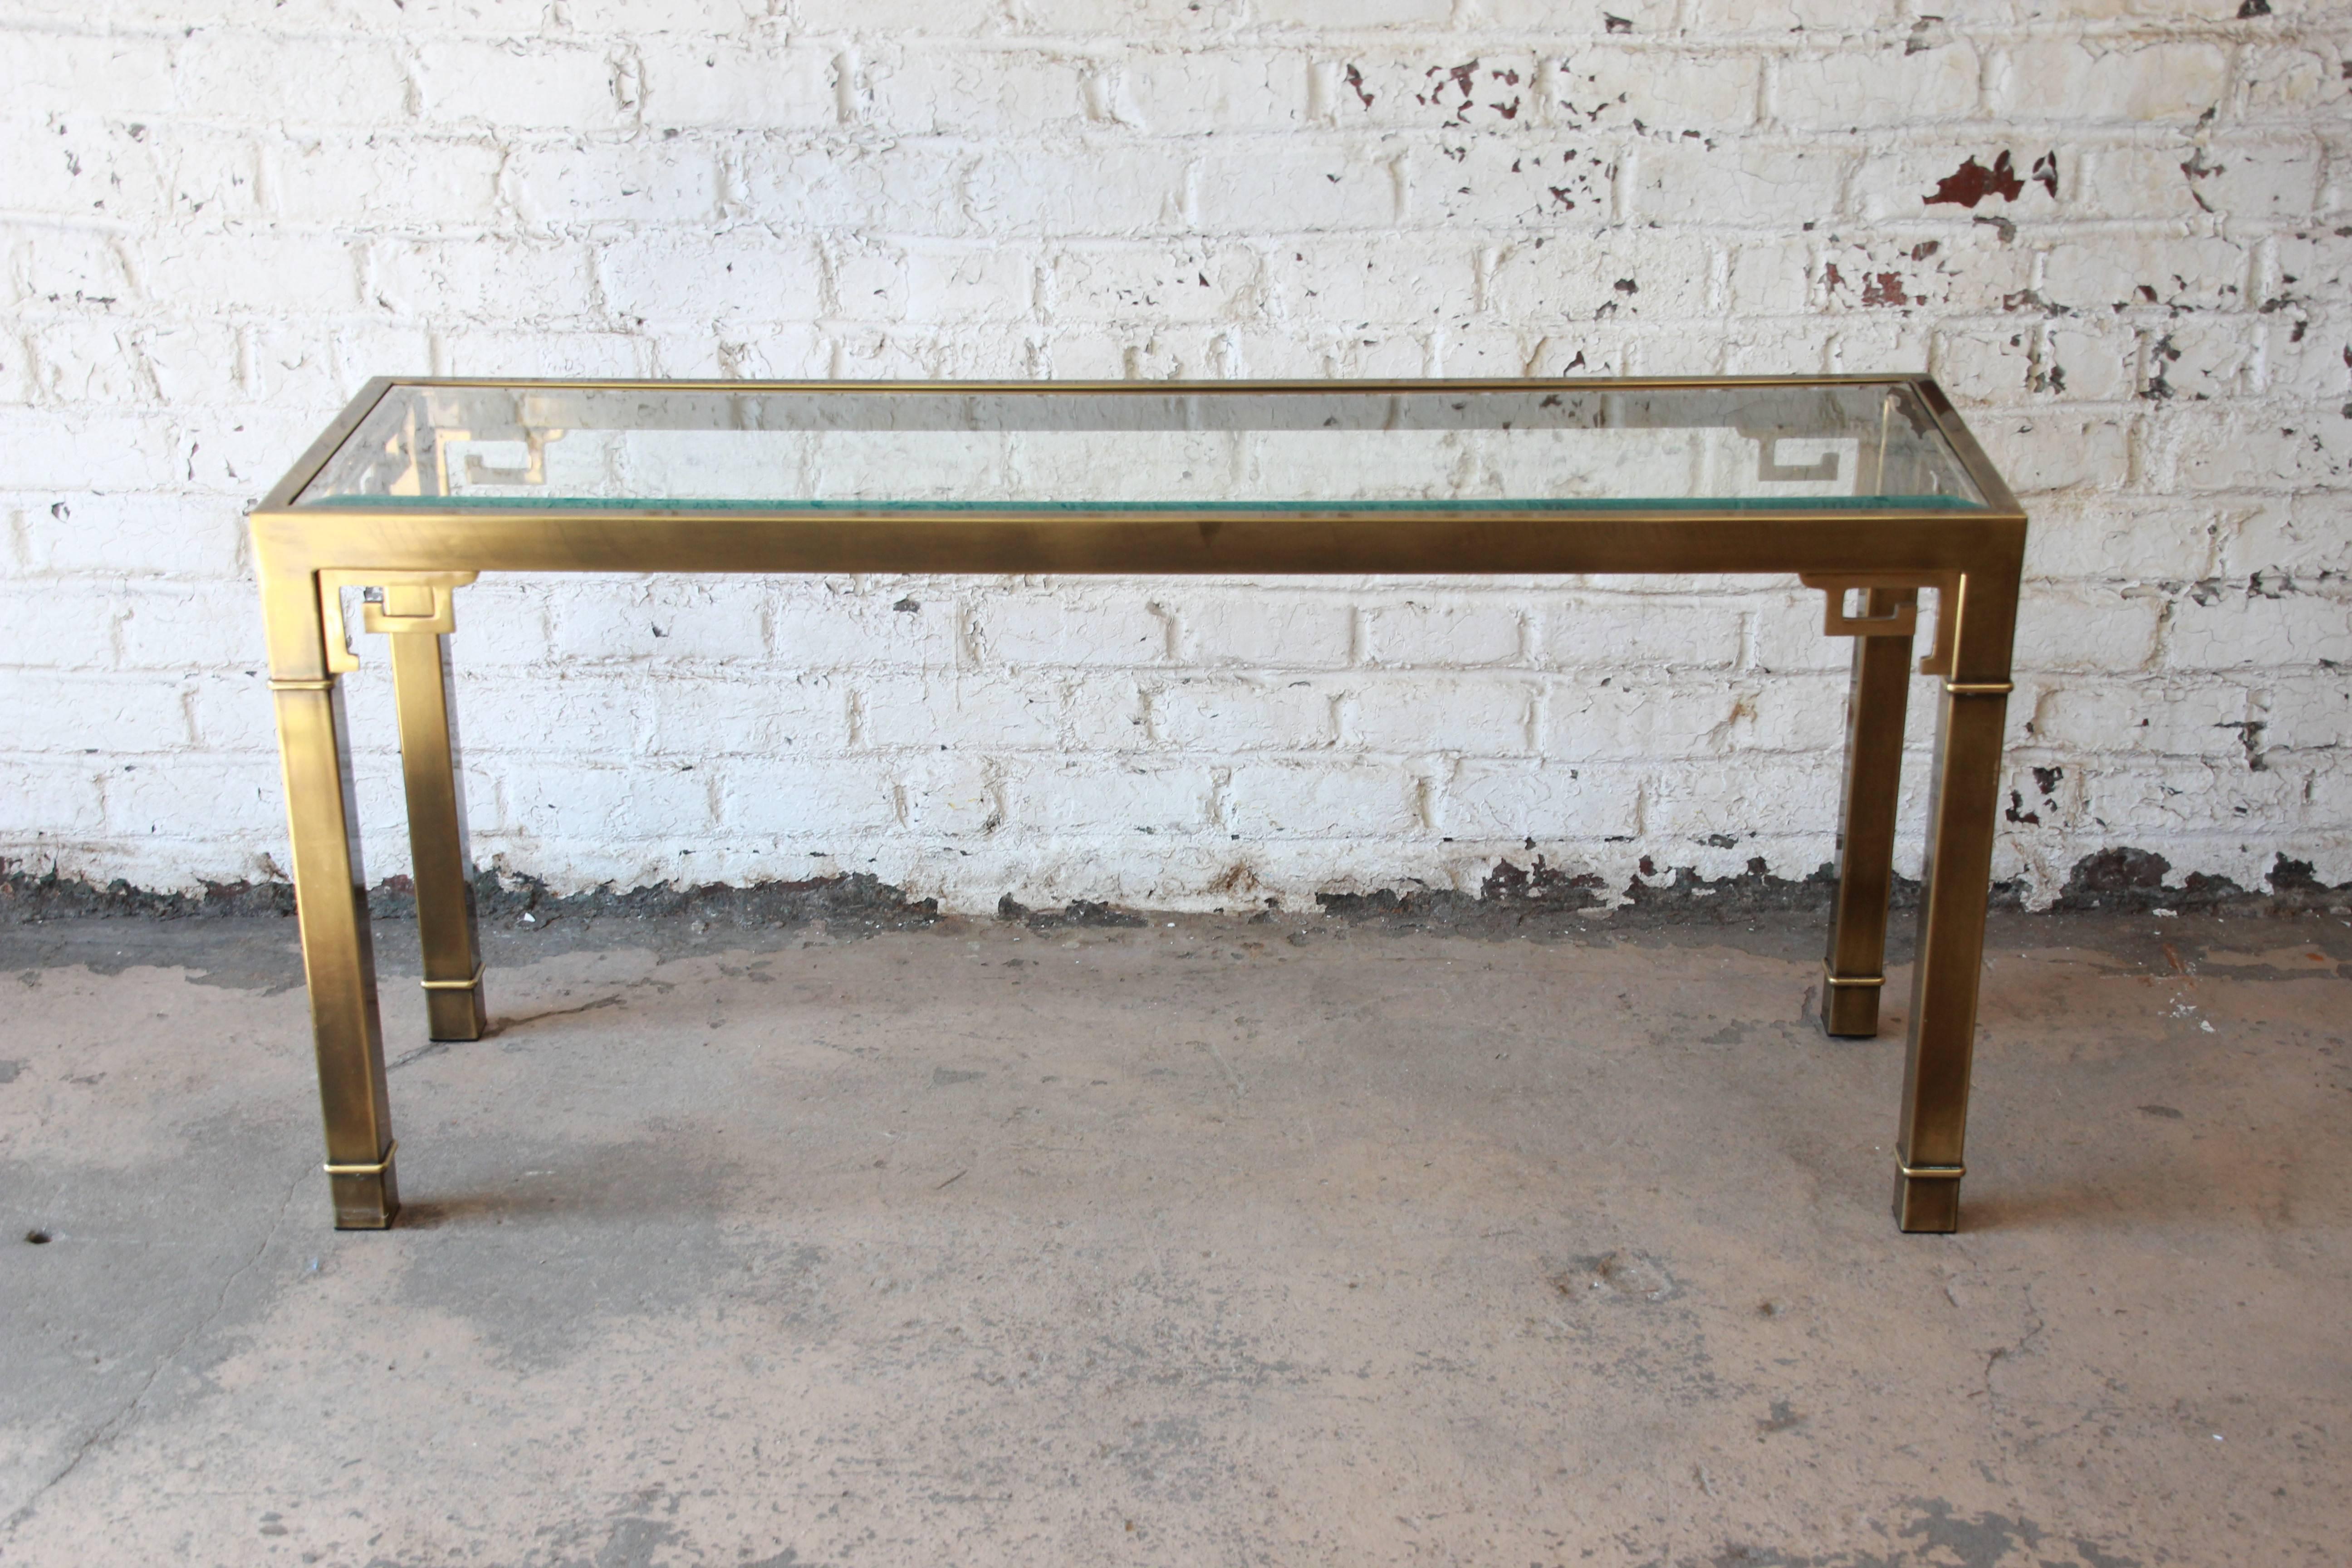 Gorgeous brass console table with Greek key accents by Mastercraft Furniture. The piece has a nice beveled glass top inset into the console. The design elements give the piece a chinoiserie style. The brass is in good condition.